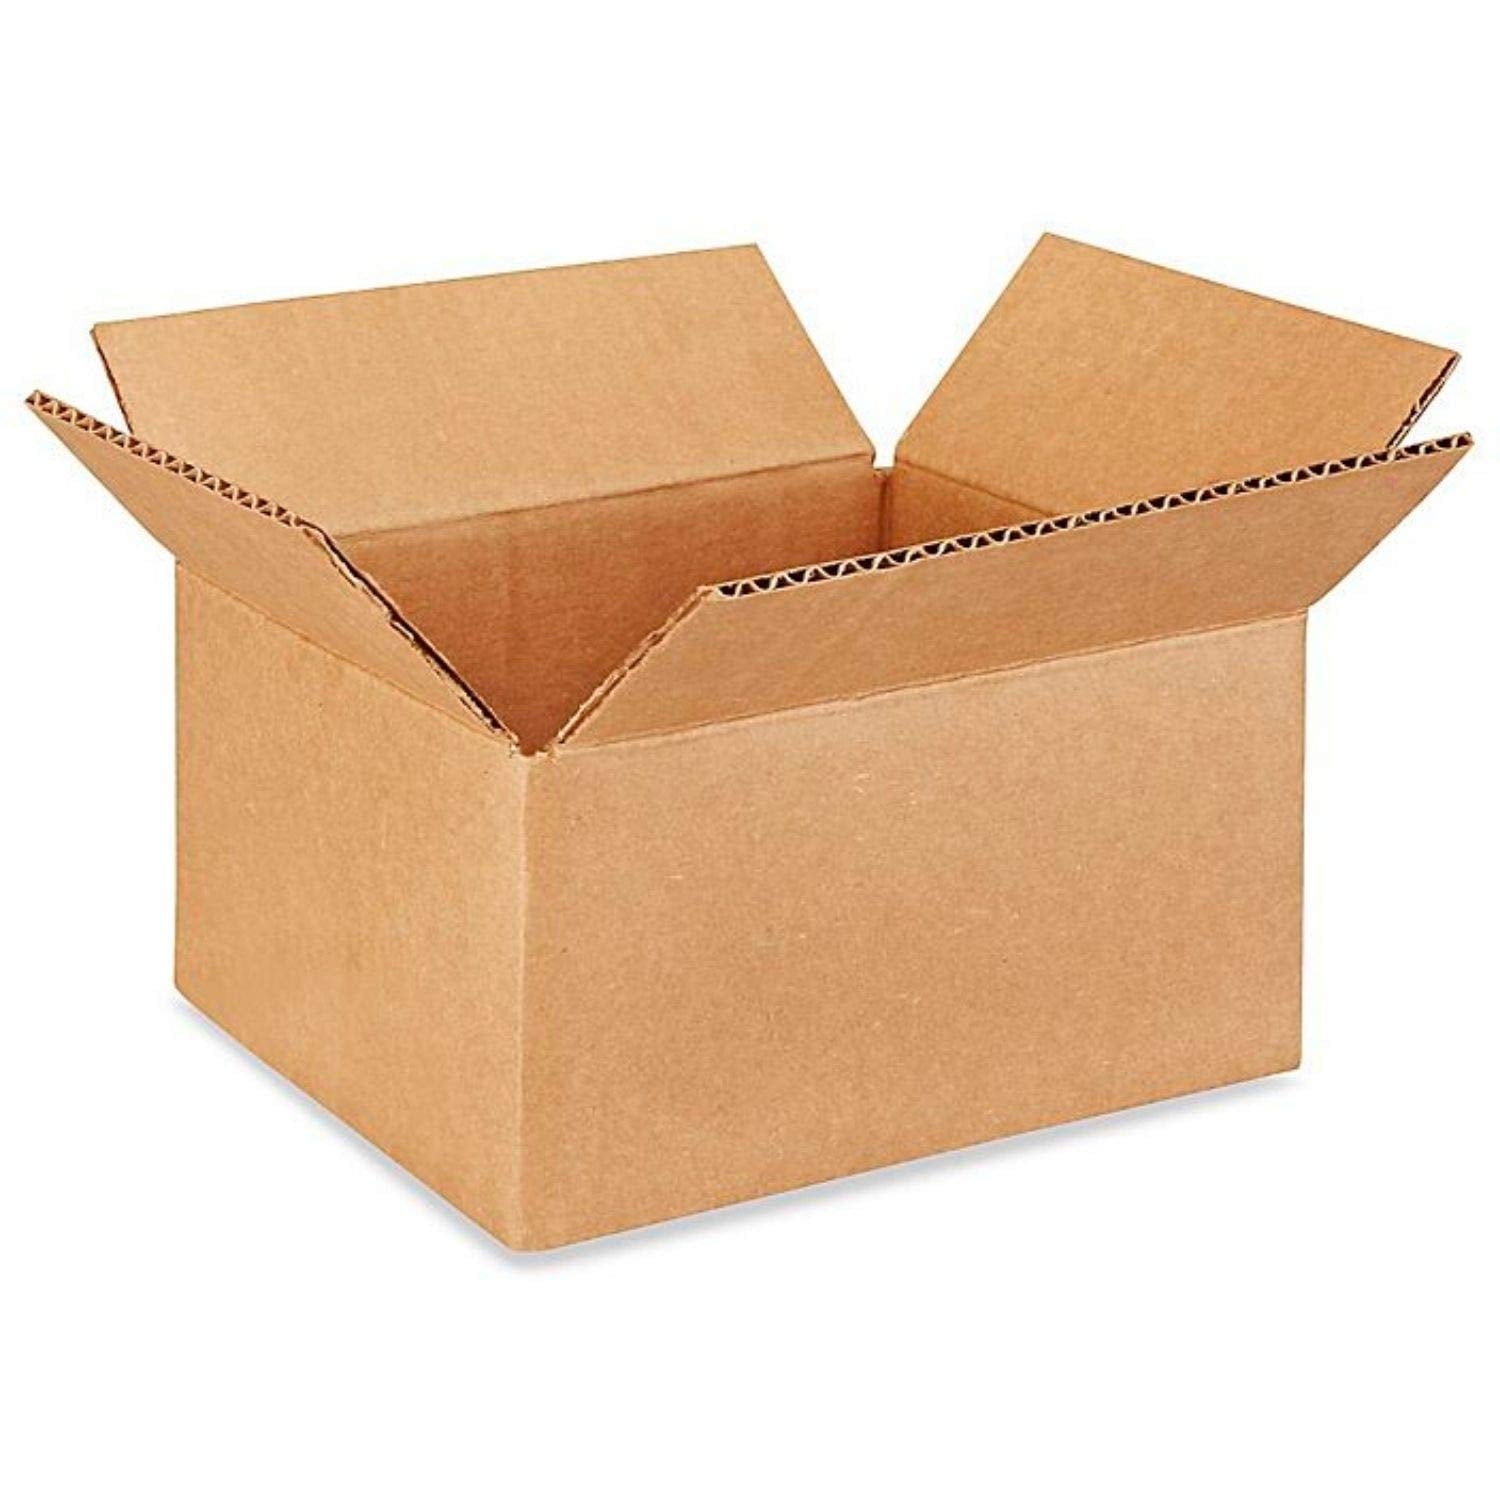 Boxes Fast Small Business Packaging, Shipping Box 18 x 6 x 45, 5 Bulk, Cardboar